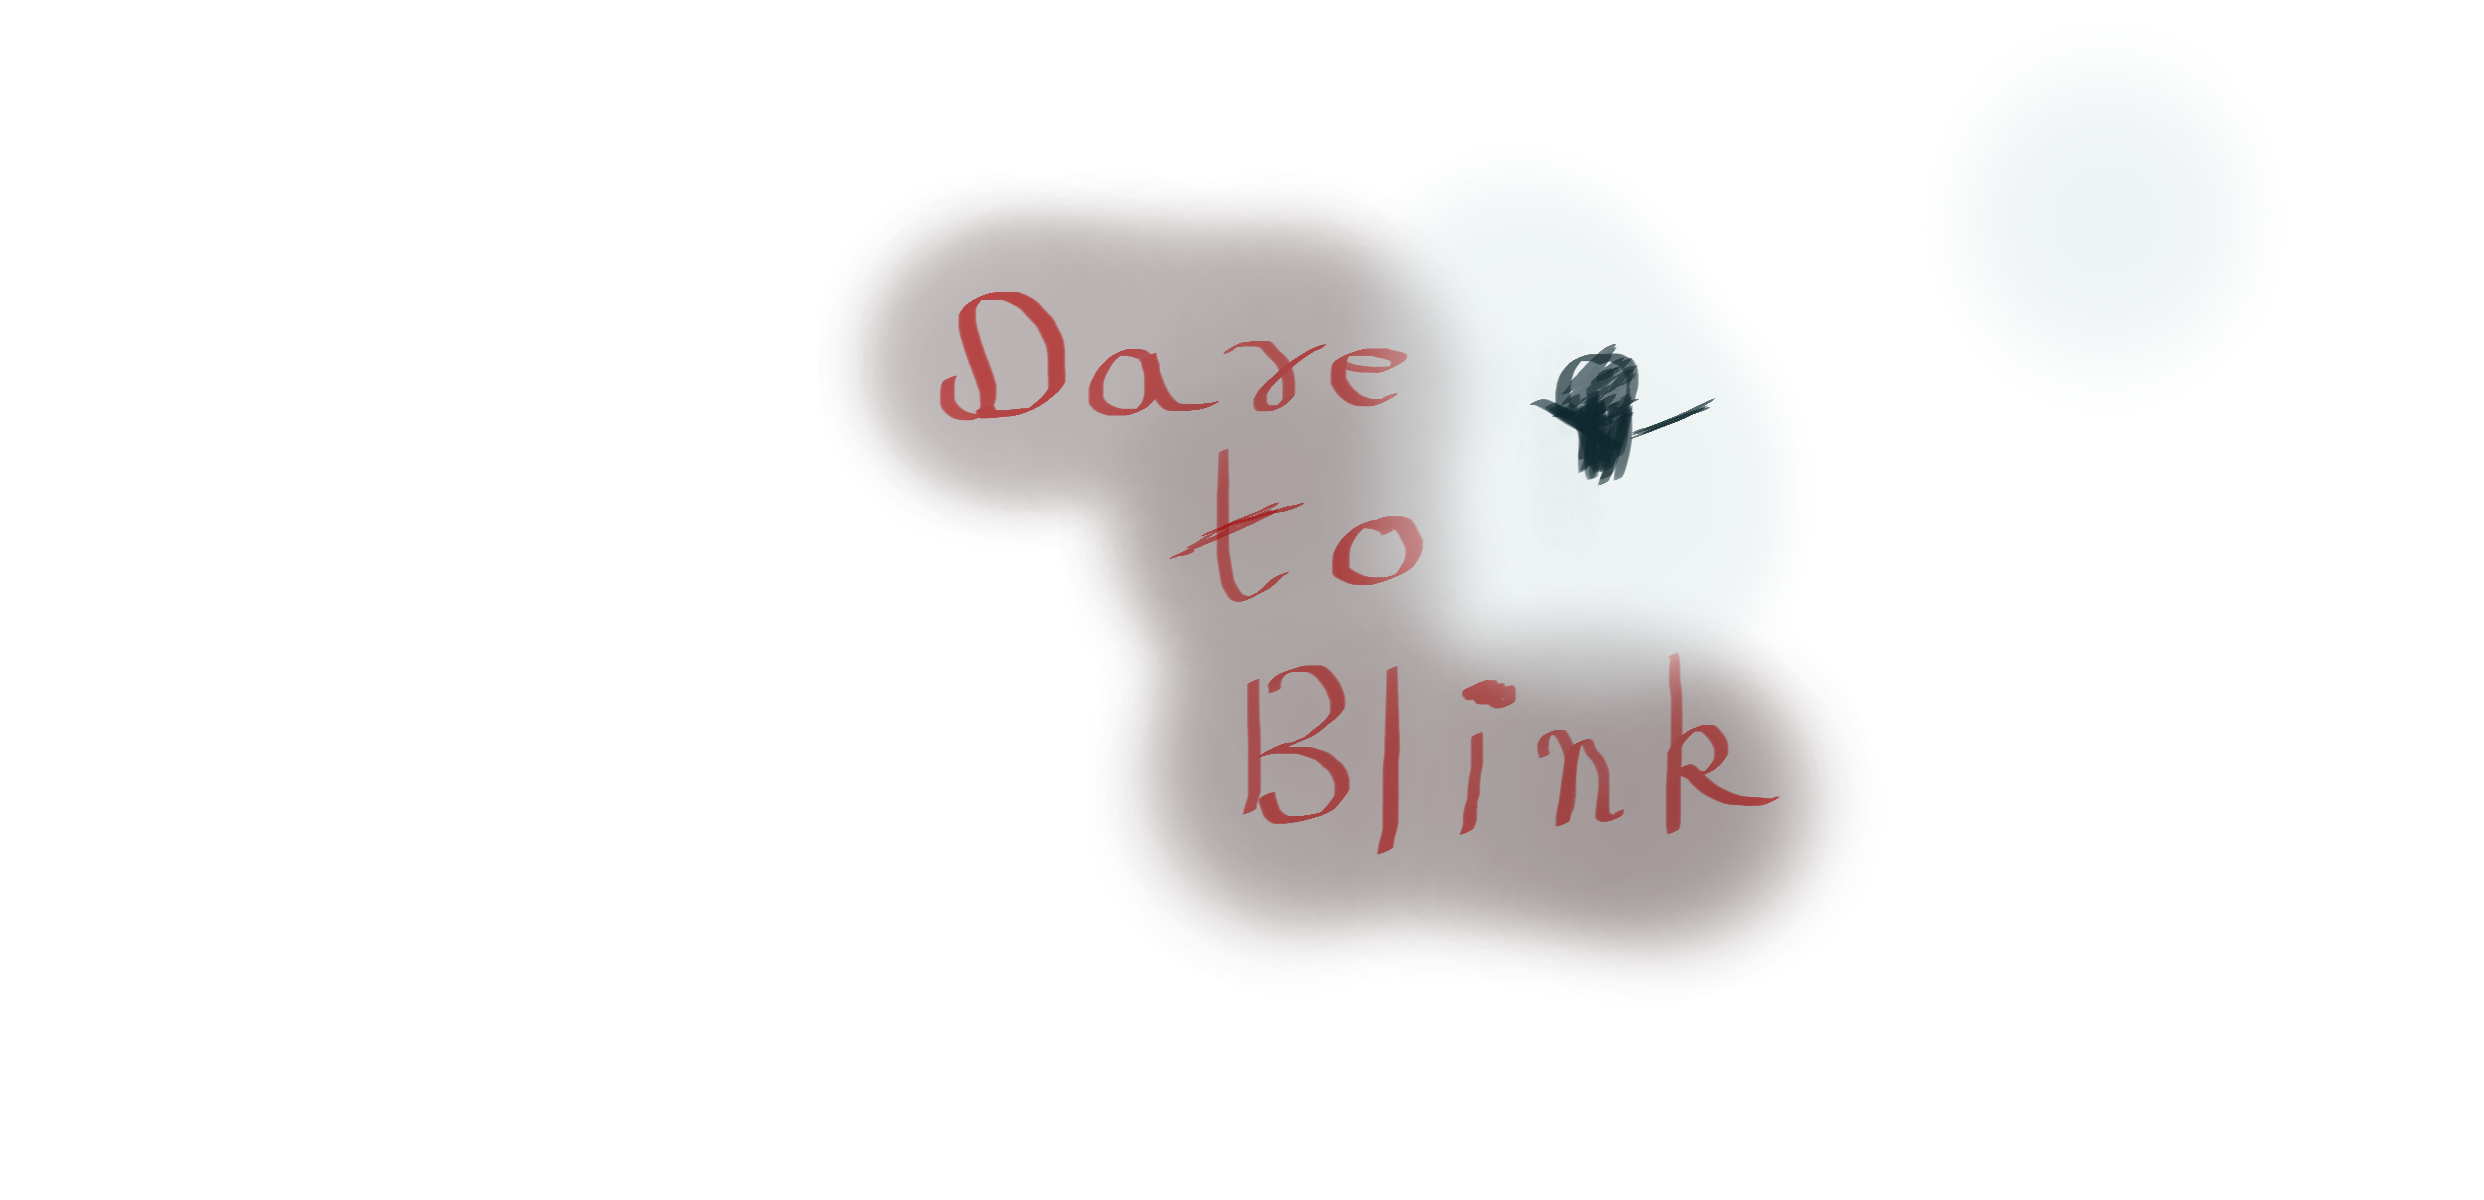 Dare to blink